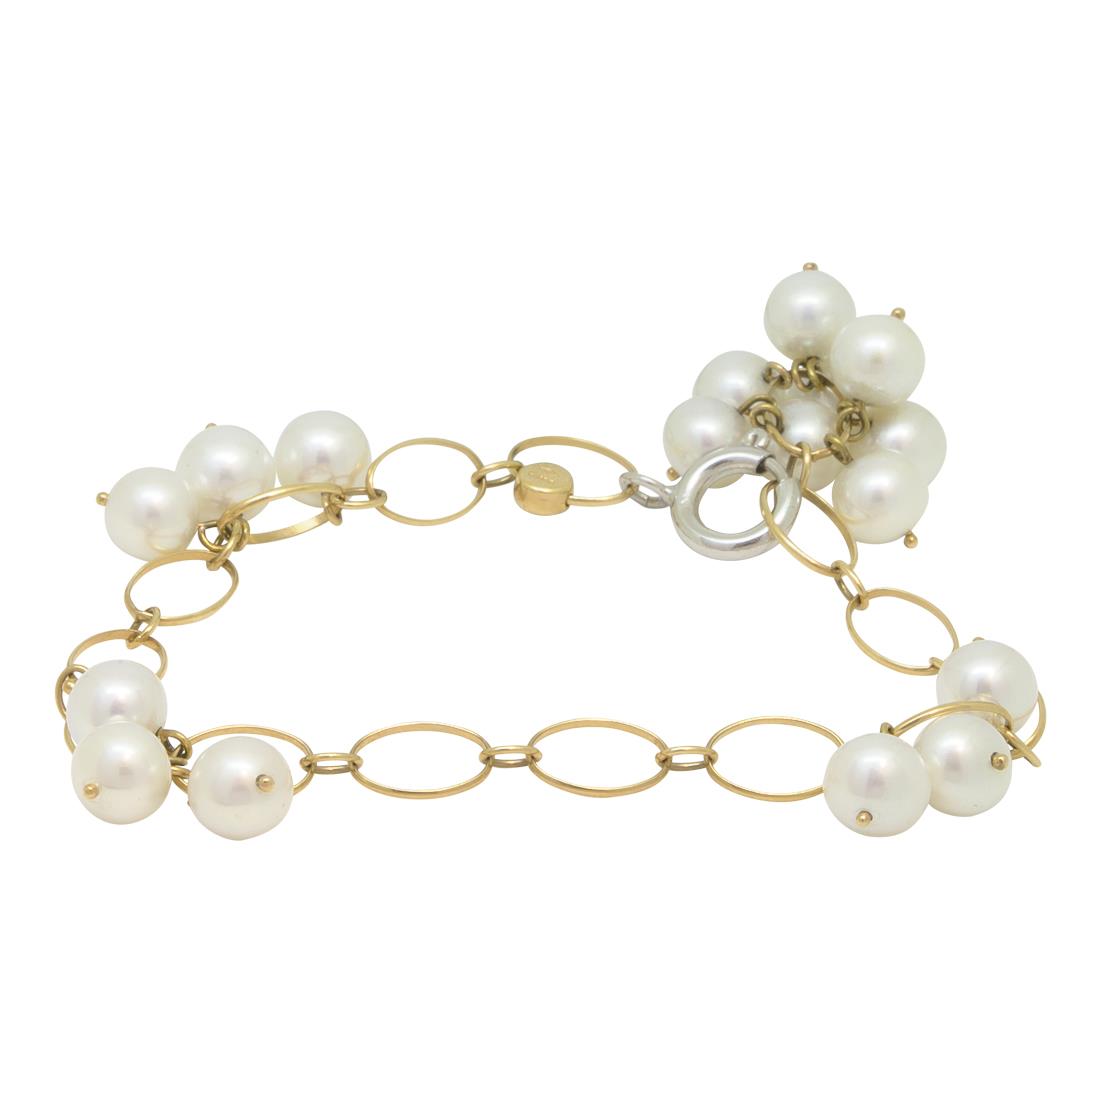 Red gold bracelet with pearls - ROBERTO DEMEGLIO - Luxury Zone